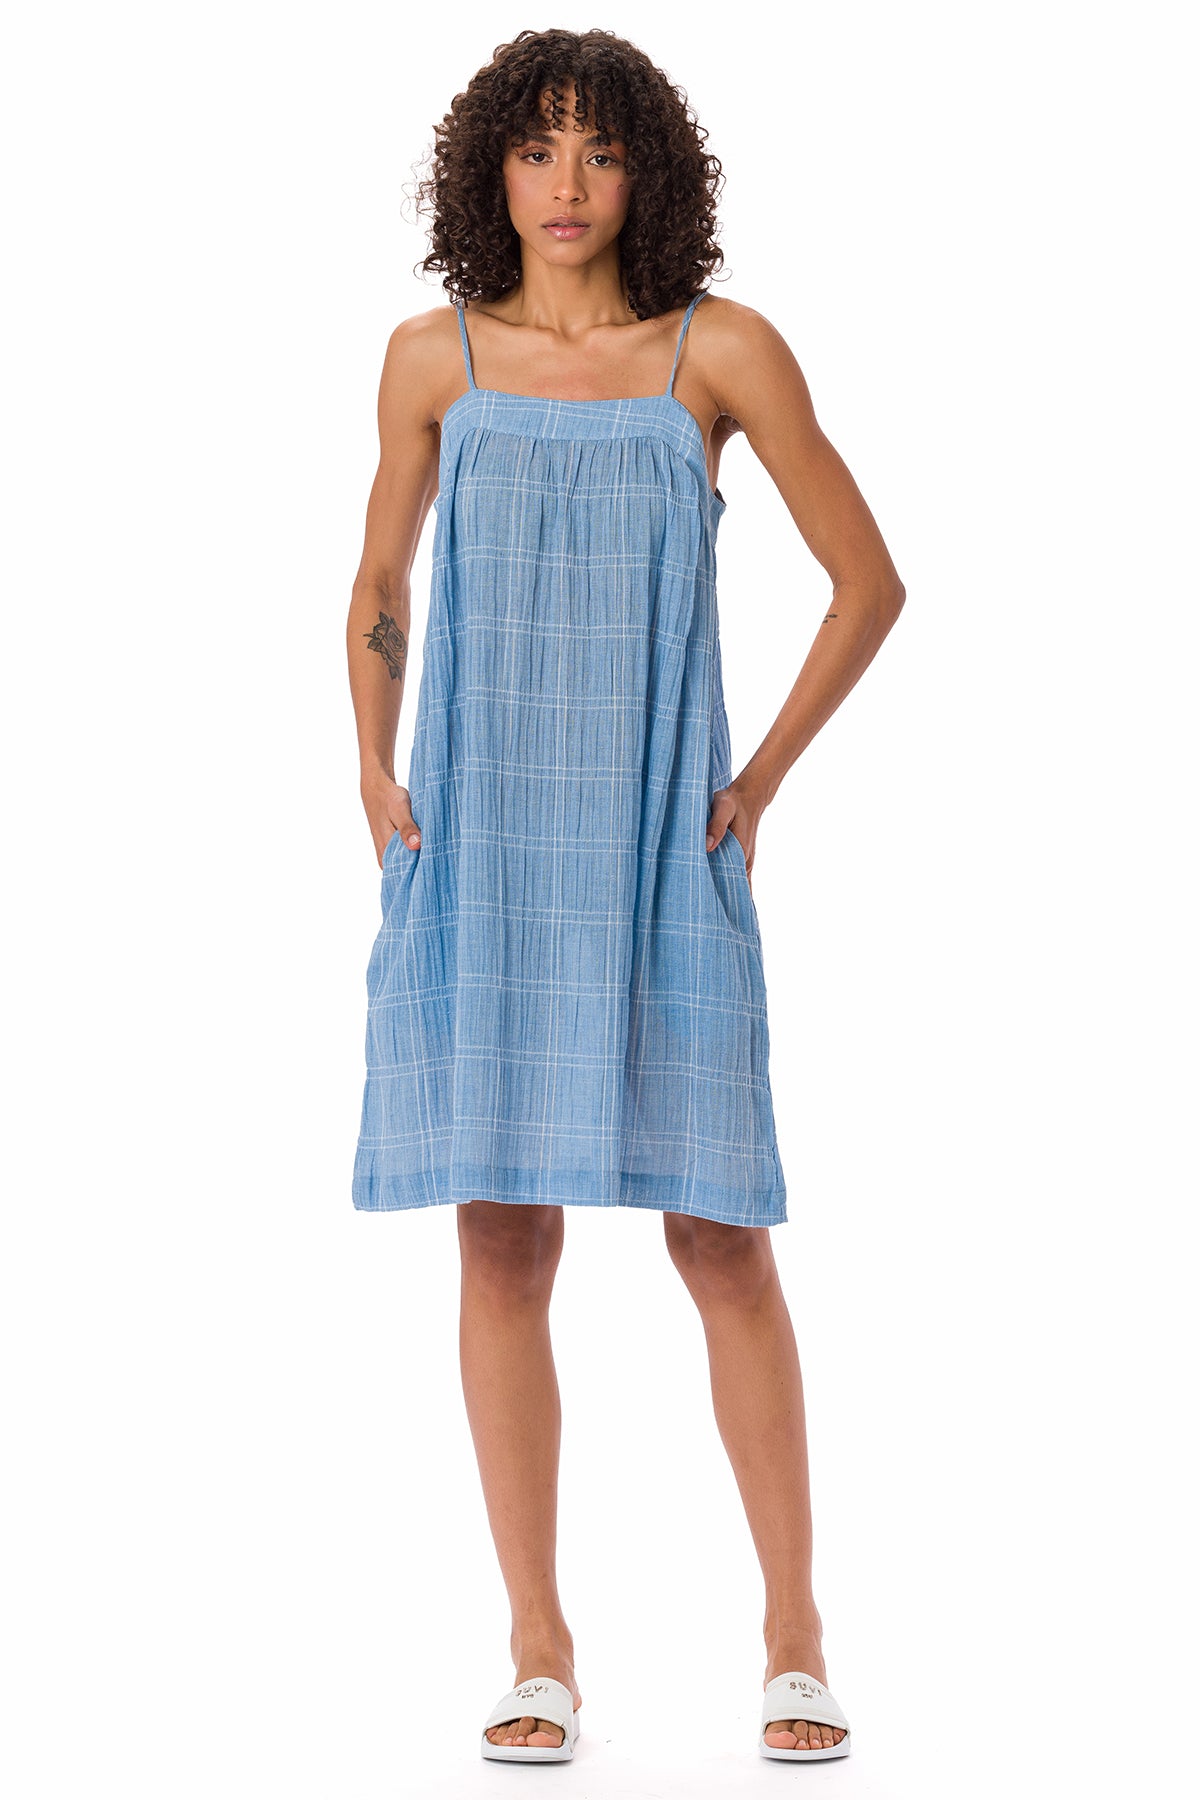 Suvi NYC. Women's summer strap dress. 100% quality Turkish cotton. Perfect for the beach, pools, or casual use. Slightly see-through. 